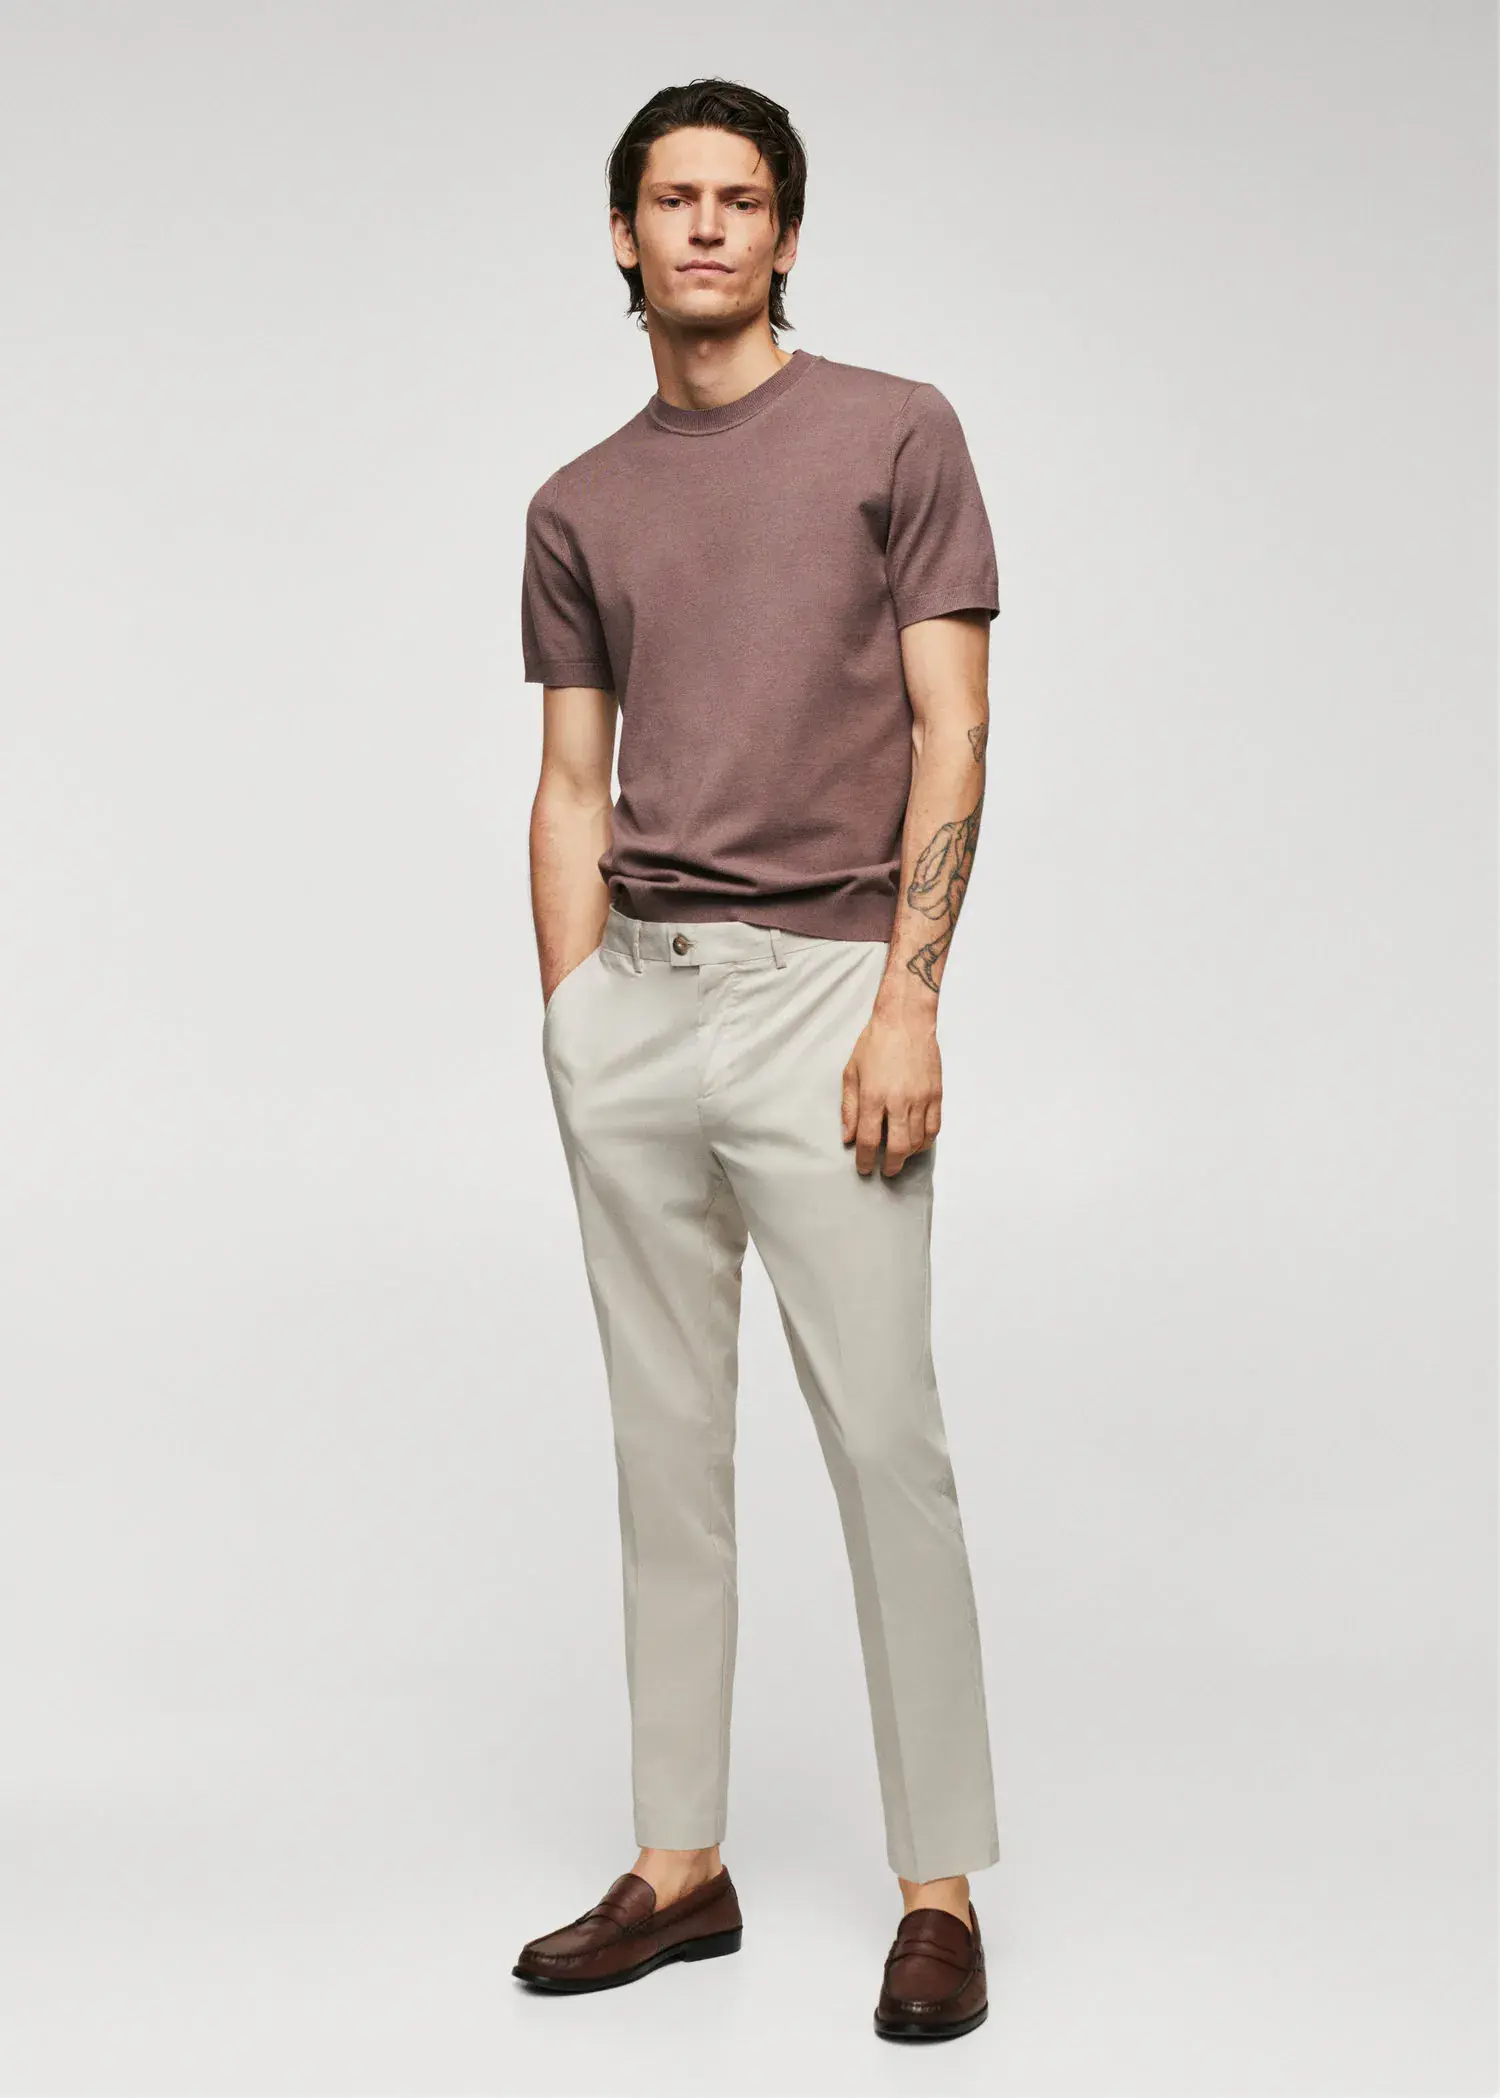 Mango Lightweight cotton trousers. a man in a brown shirt and white pants. 